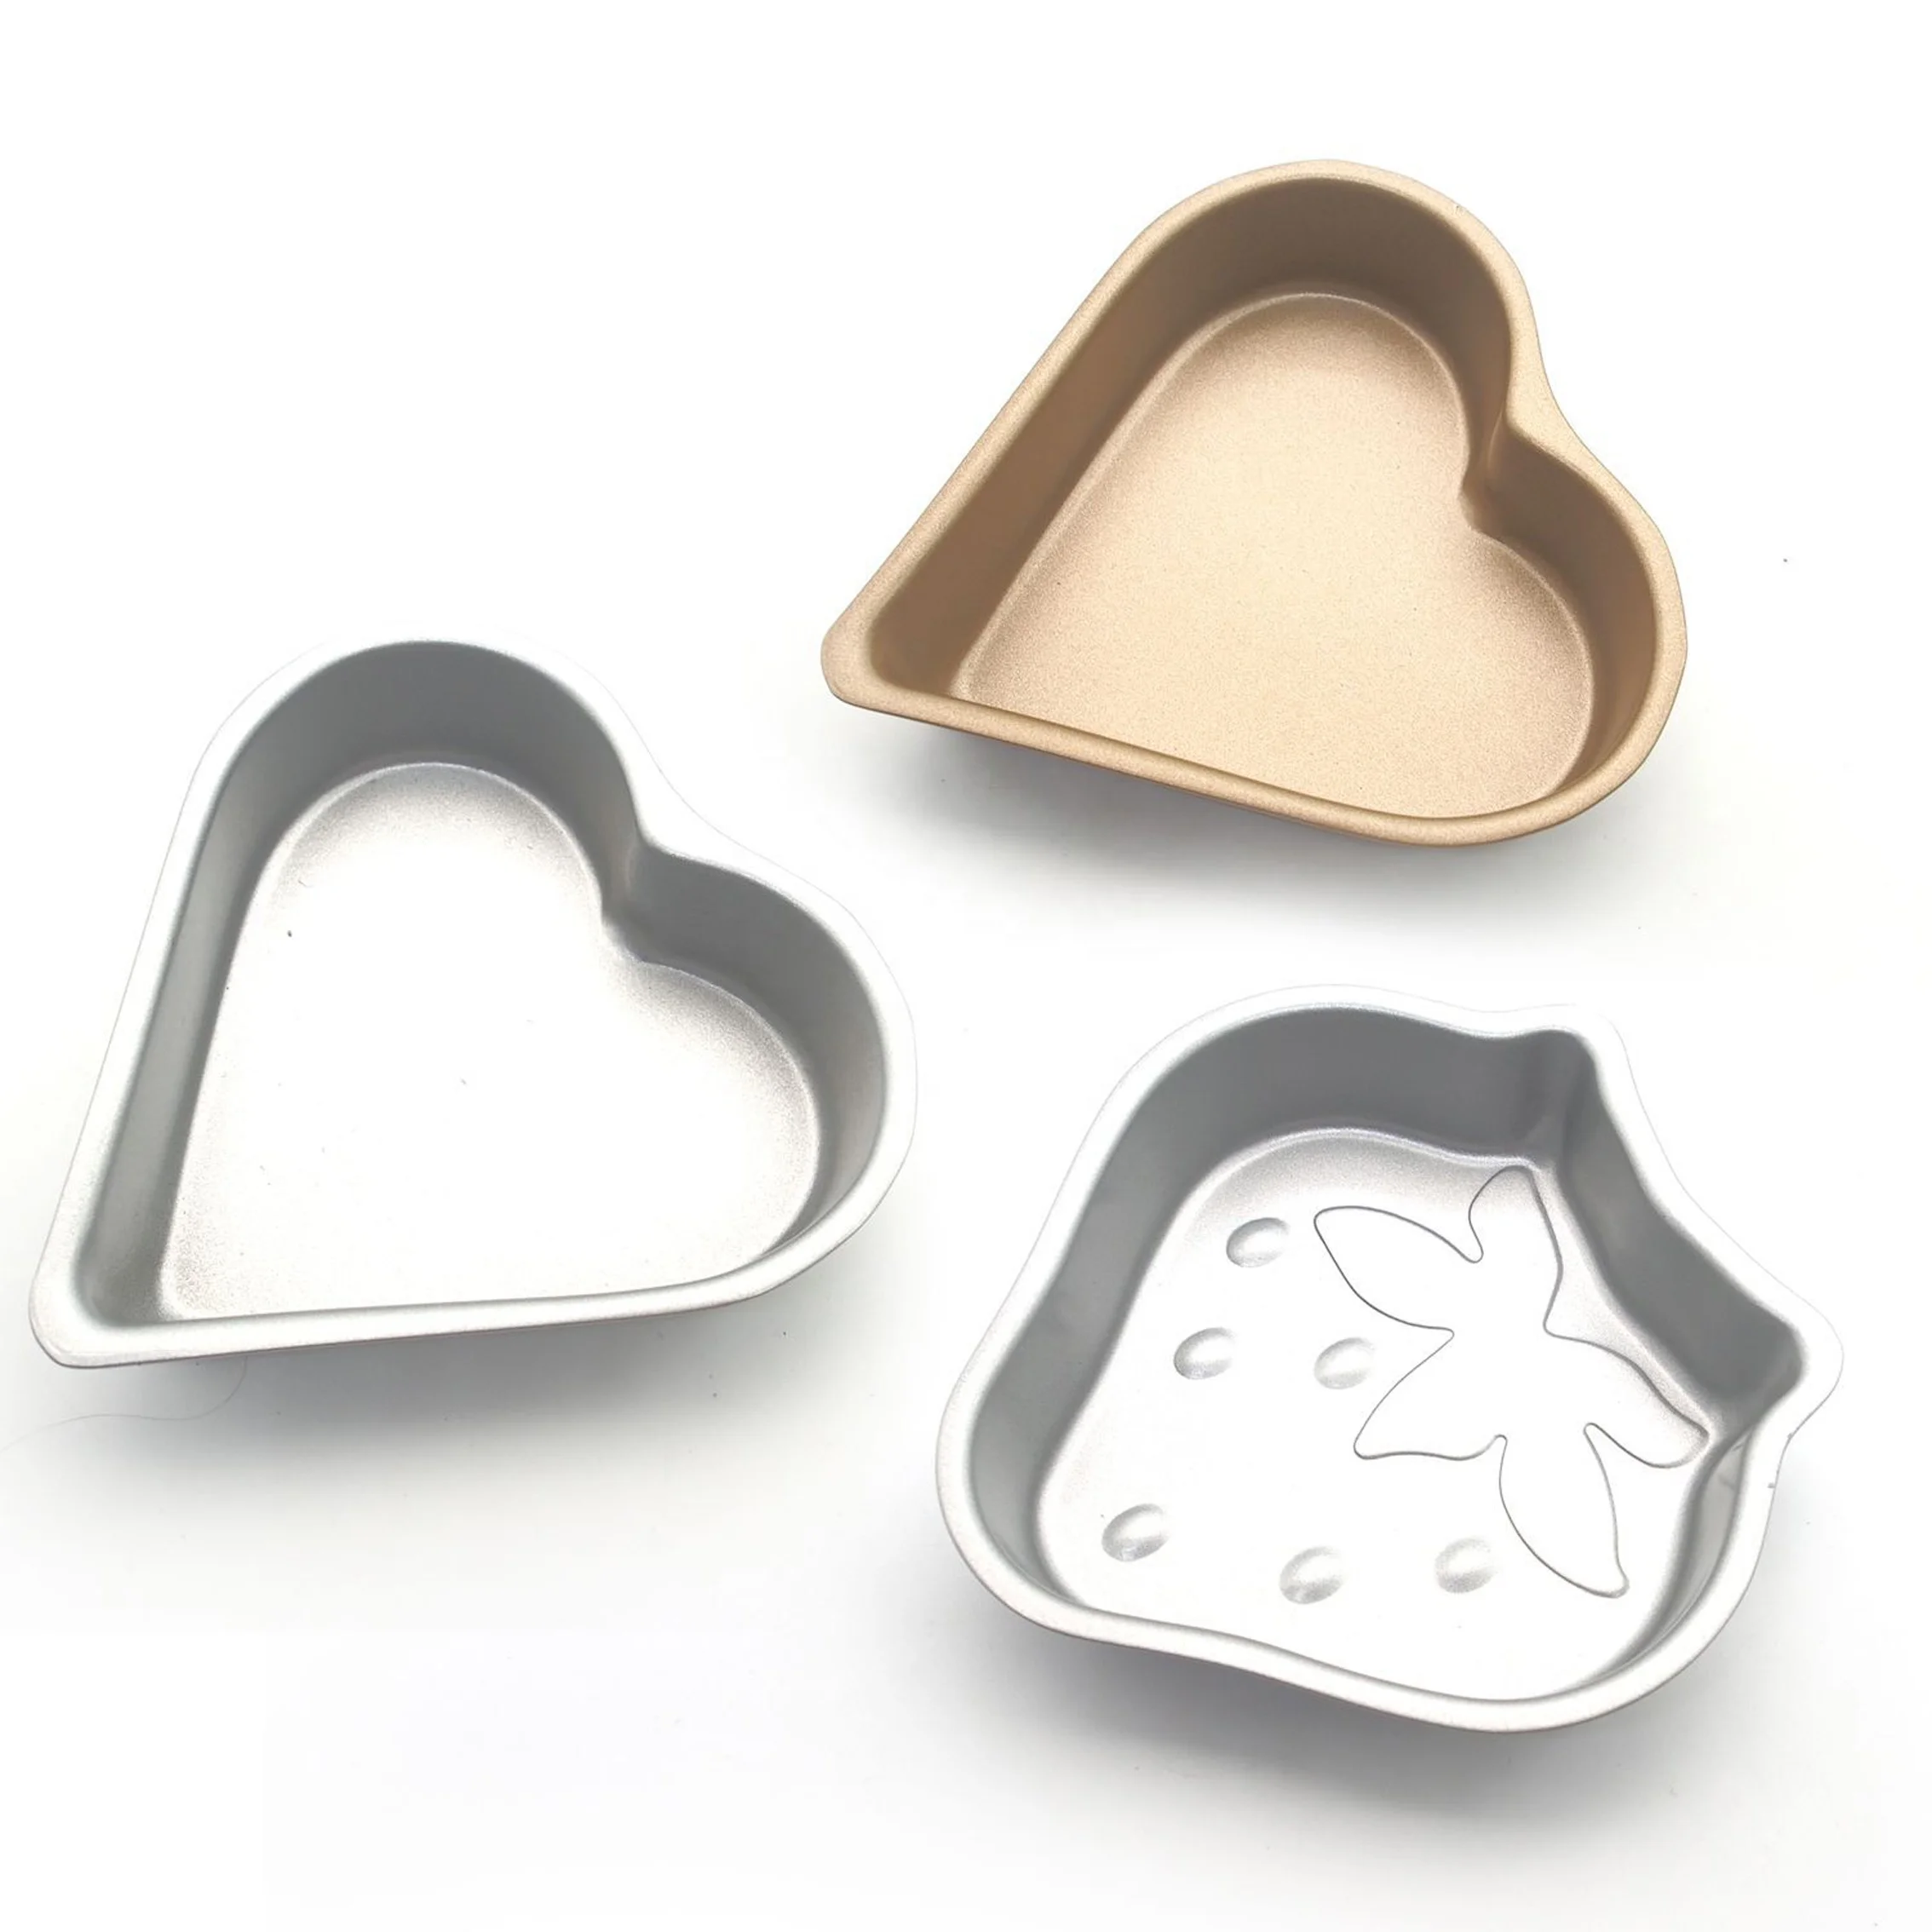 Top Selling Products 2023 Carbon Steel 3.5 Inch Strawberry Shaped Cake Mold Egg Tart Mold Baking Pan Kitchen Accessories Aluminum alloy cake molds